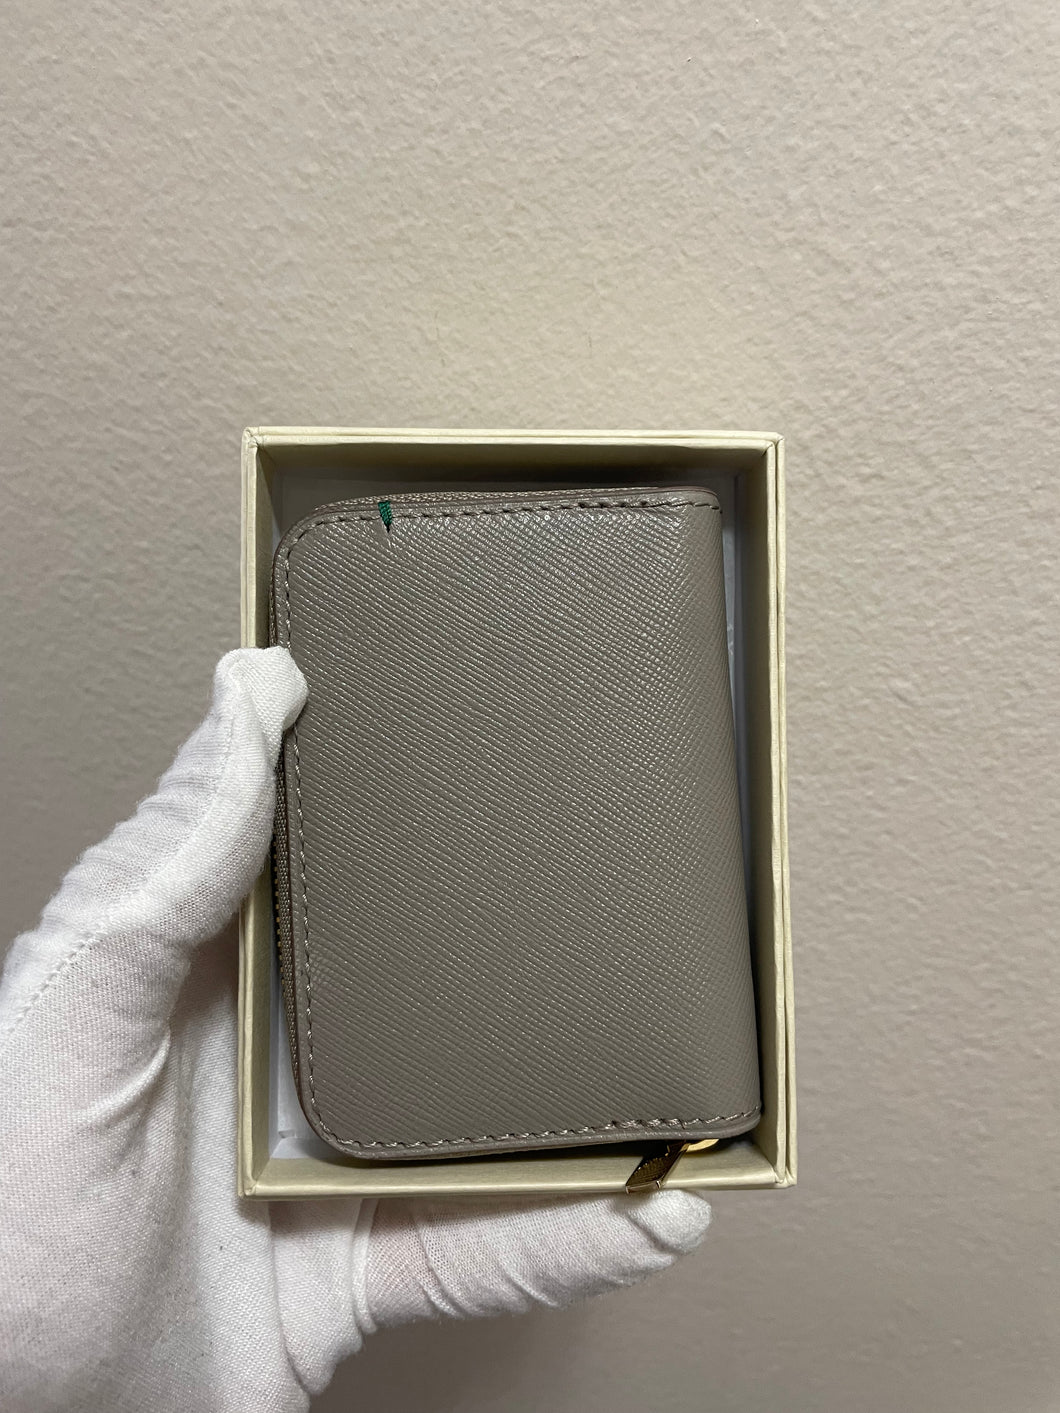 Brand new Rolex AD grey zip wallet (1 available)